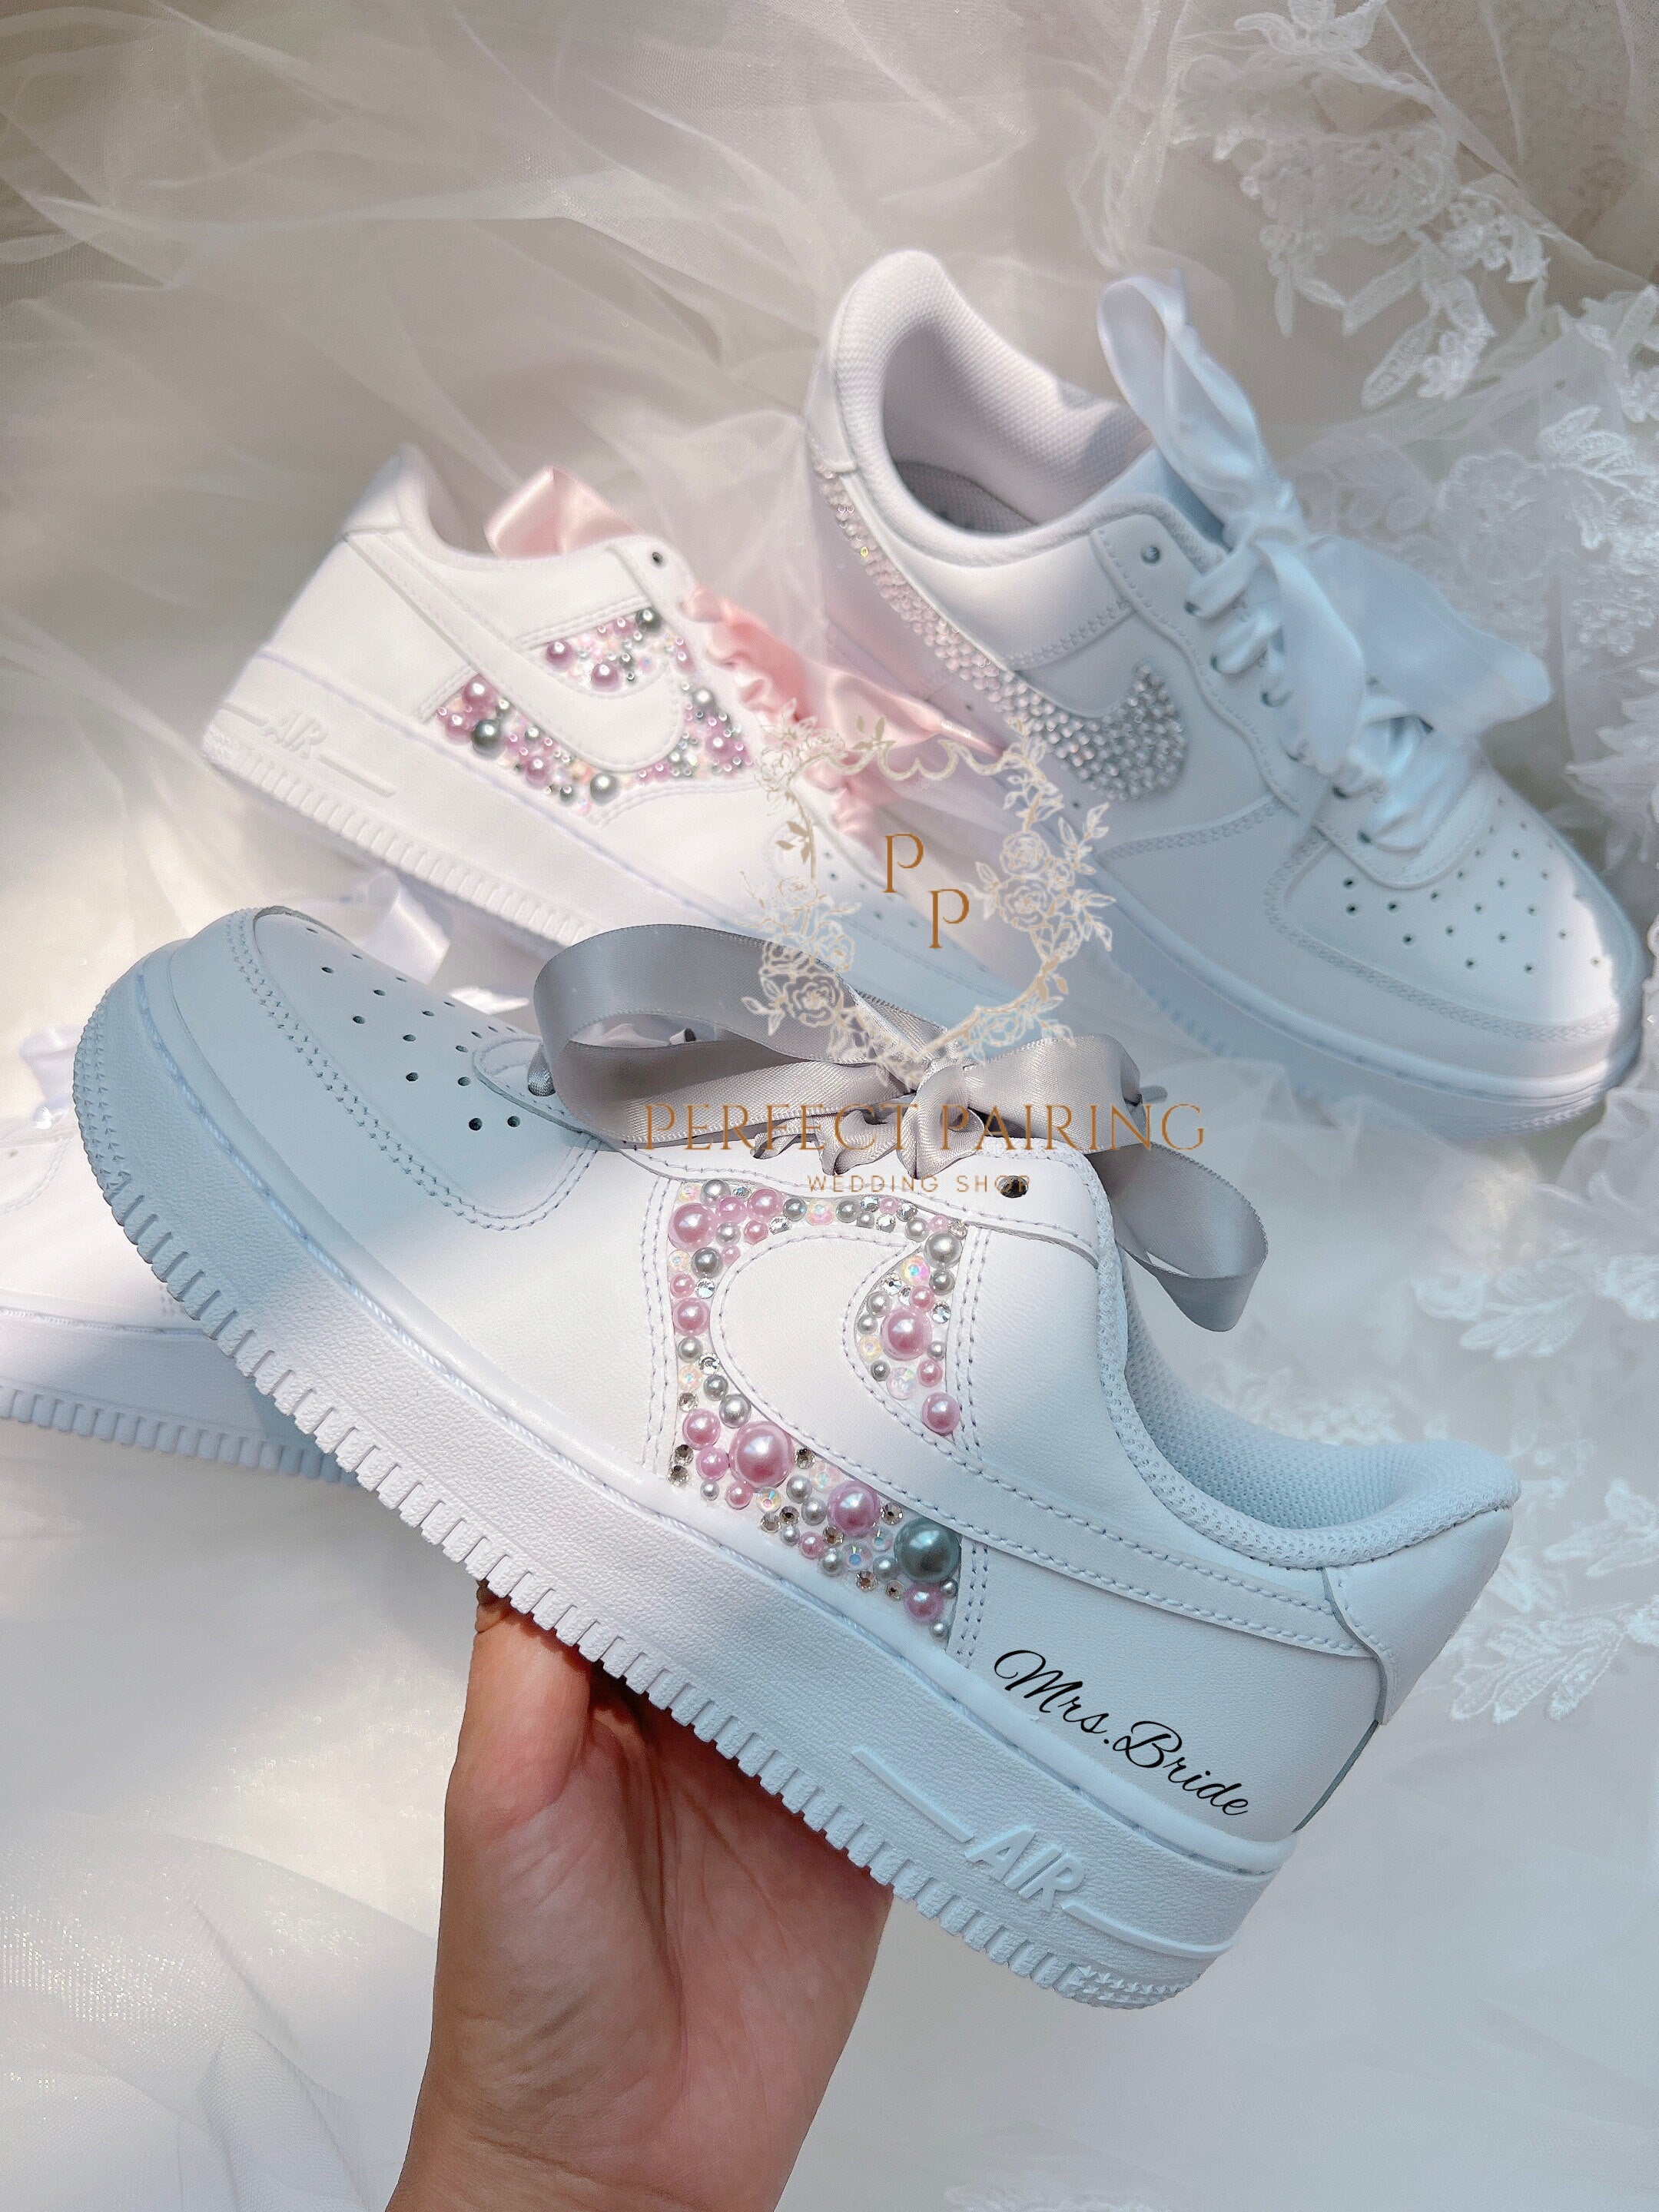 Wedding Shoes Custom Air Force 1 Pearls and Diamonds